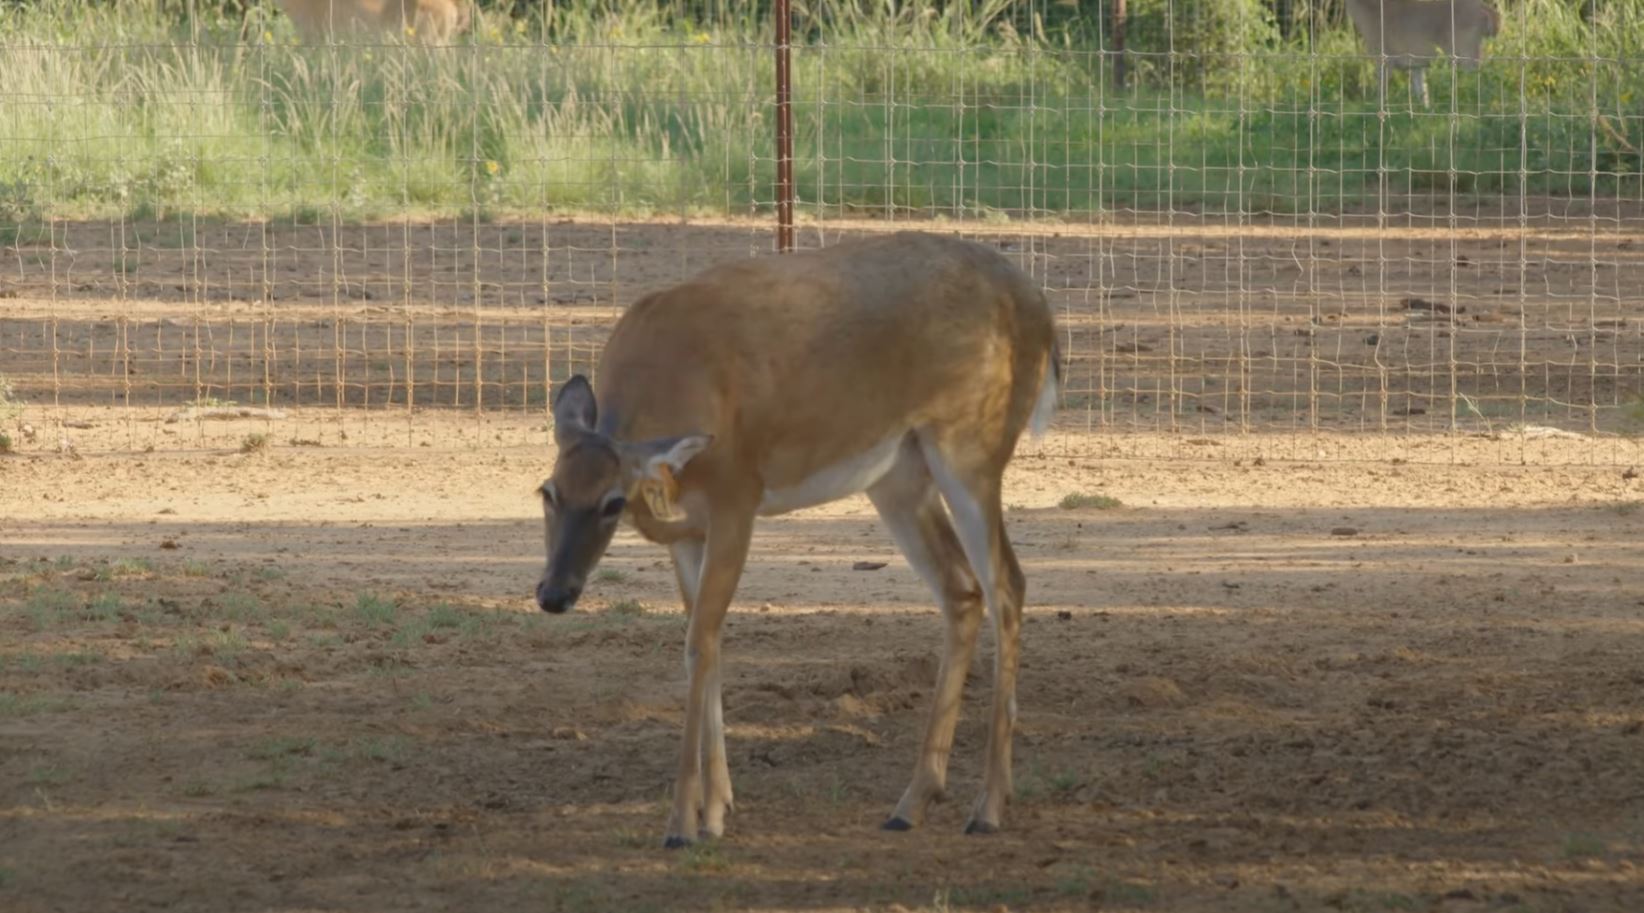 CWD Cured? New Video From The High Road Group Gives Hope